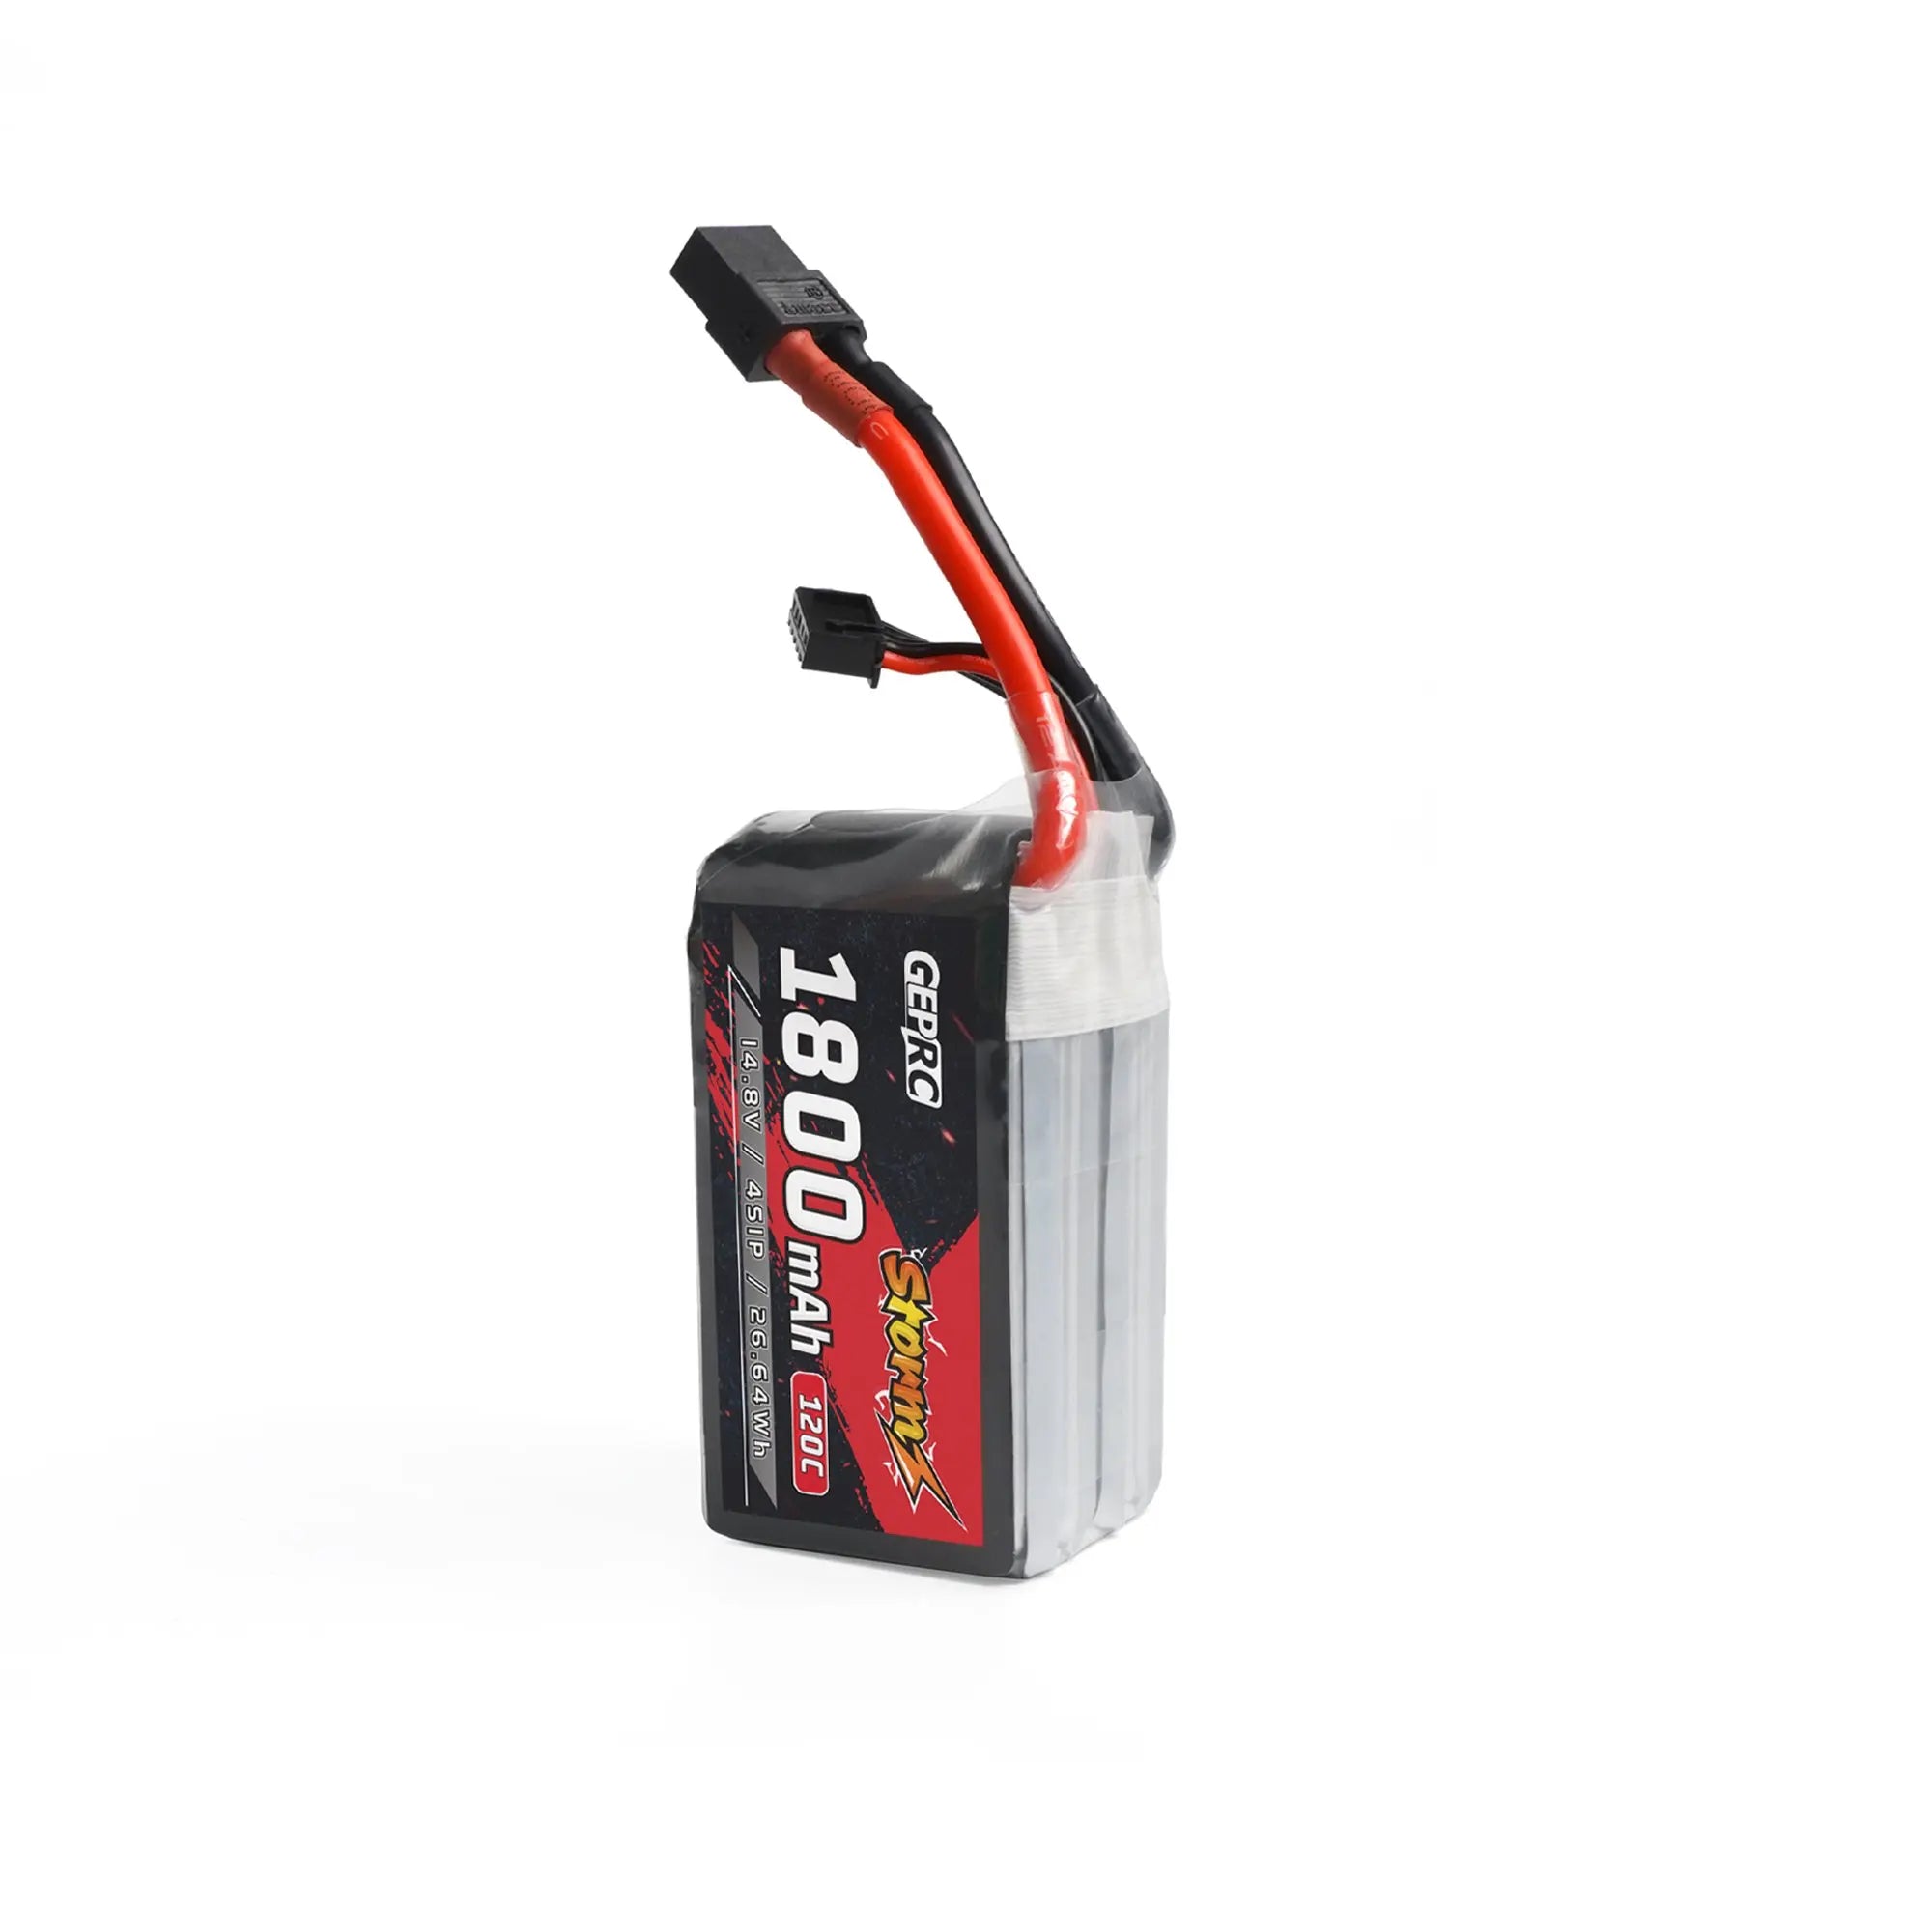 GEPRC Storm 4S 1800mAh 120C Lipo Battery, Q: What is the appropriate charging rate C for the battery